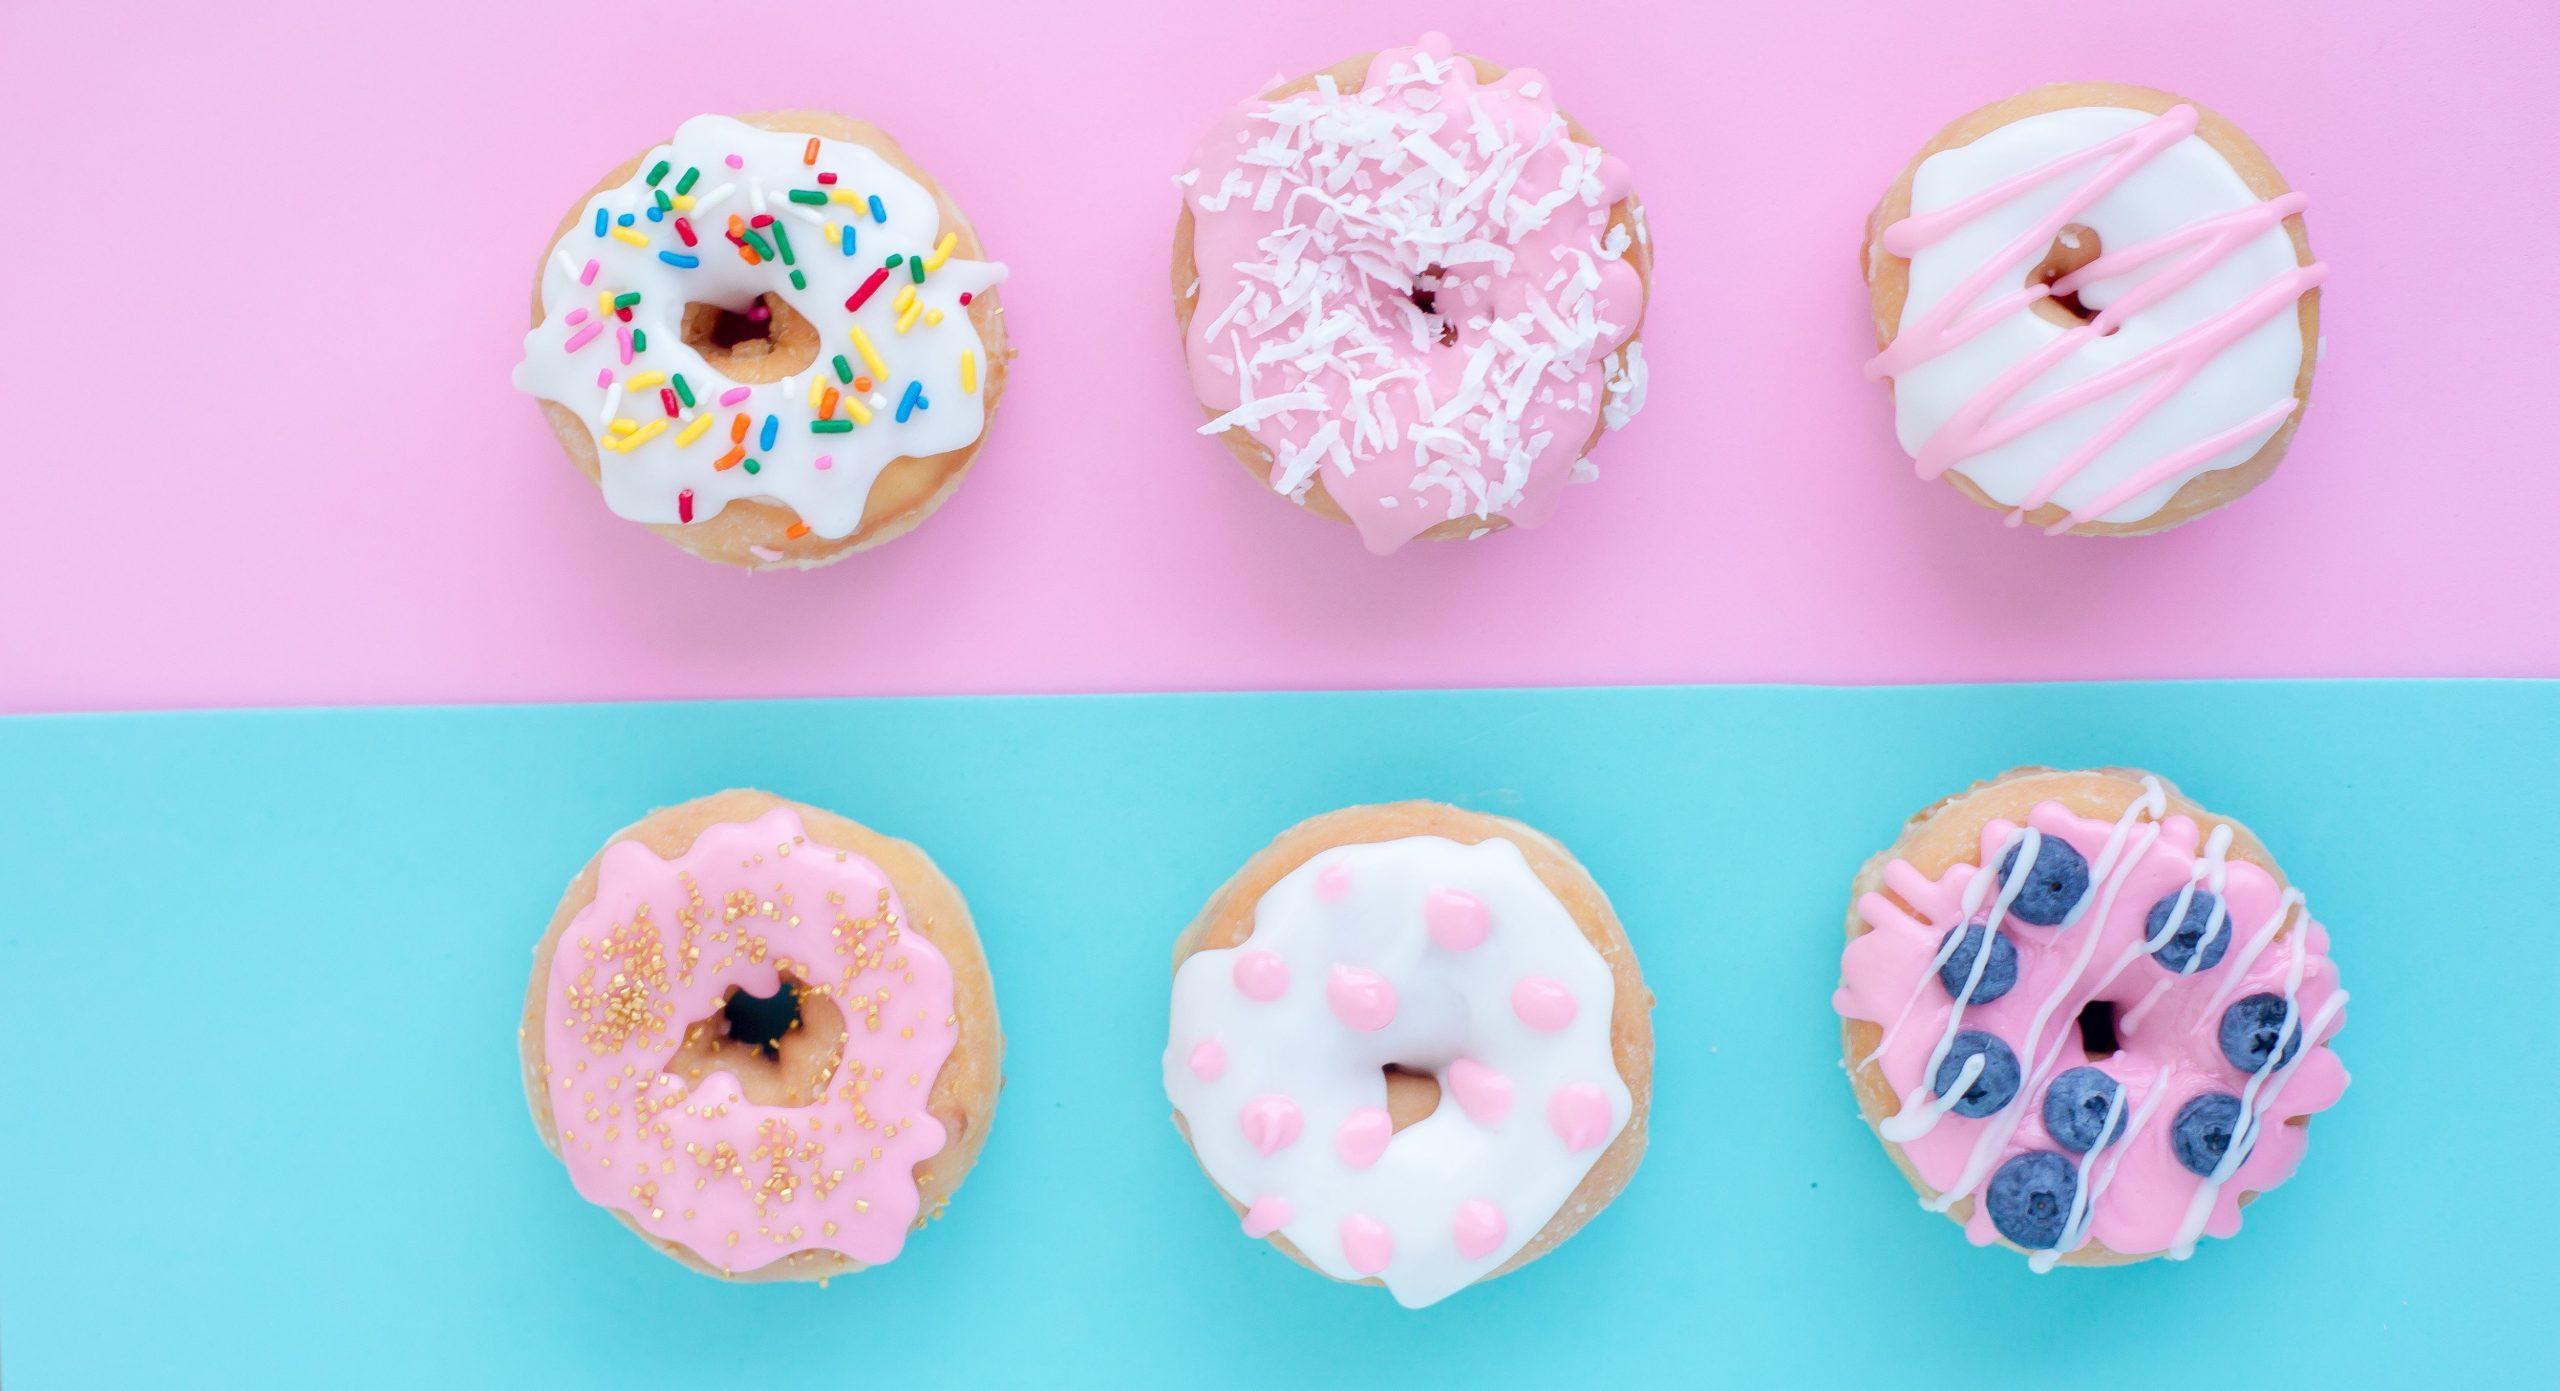 Variable iced donuts placed against a pink and blue background.